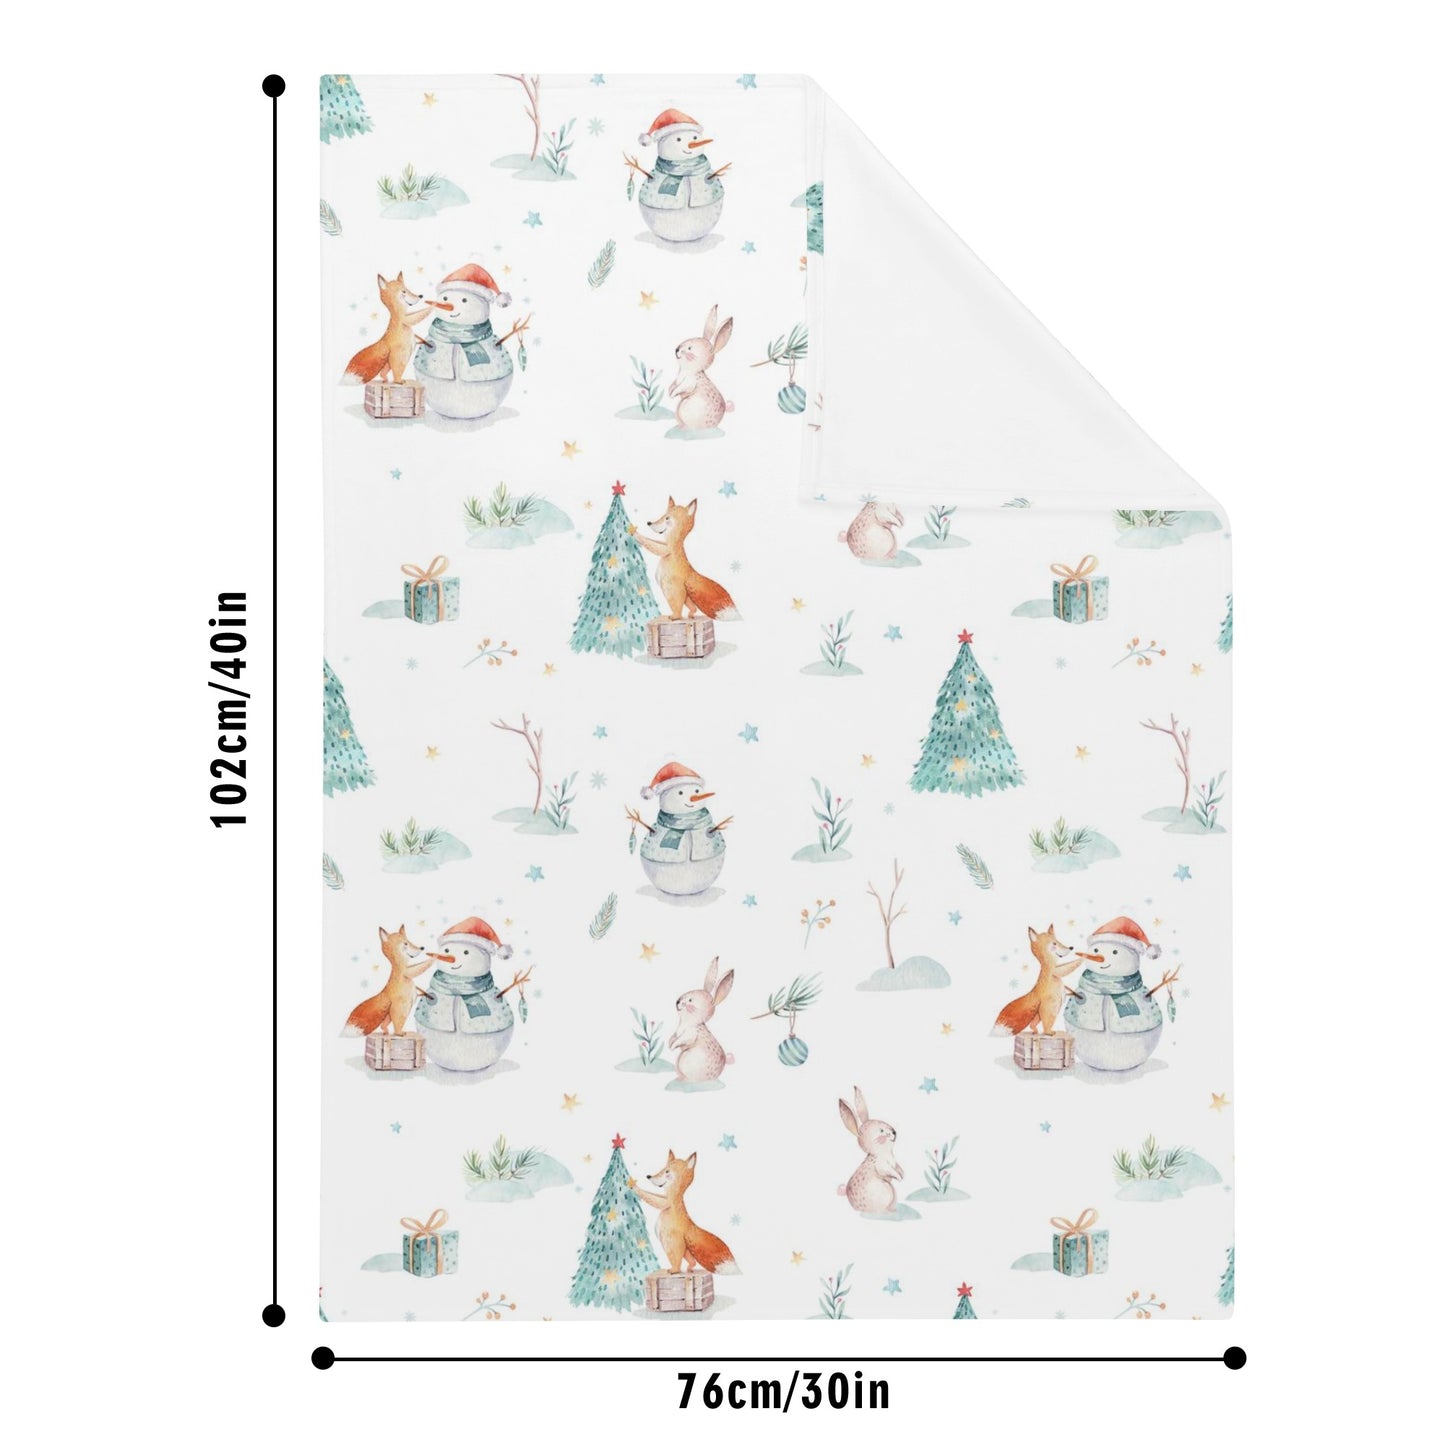 Its a Fox Day for Christmas Soft Flannel Breathable Blanket